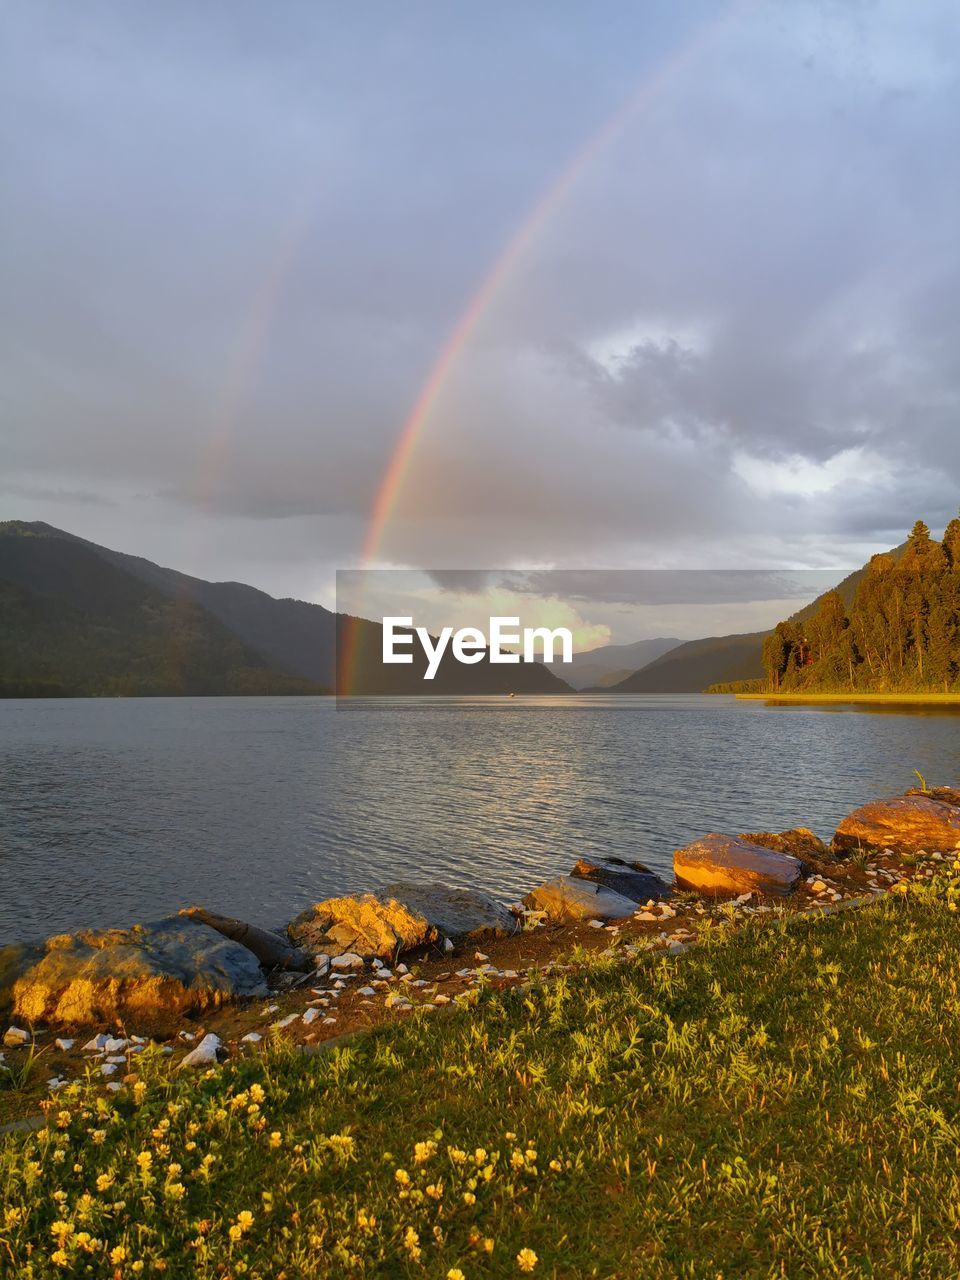 SCENIC VIEW OF RAINBOW OVER LAKE AND MOUNTAINS